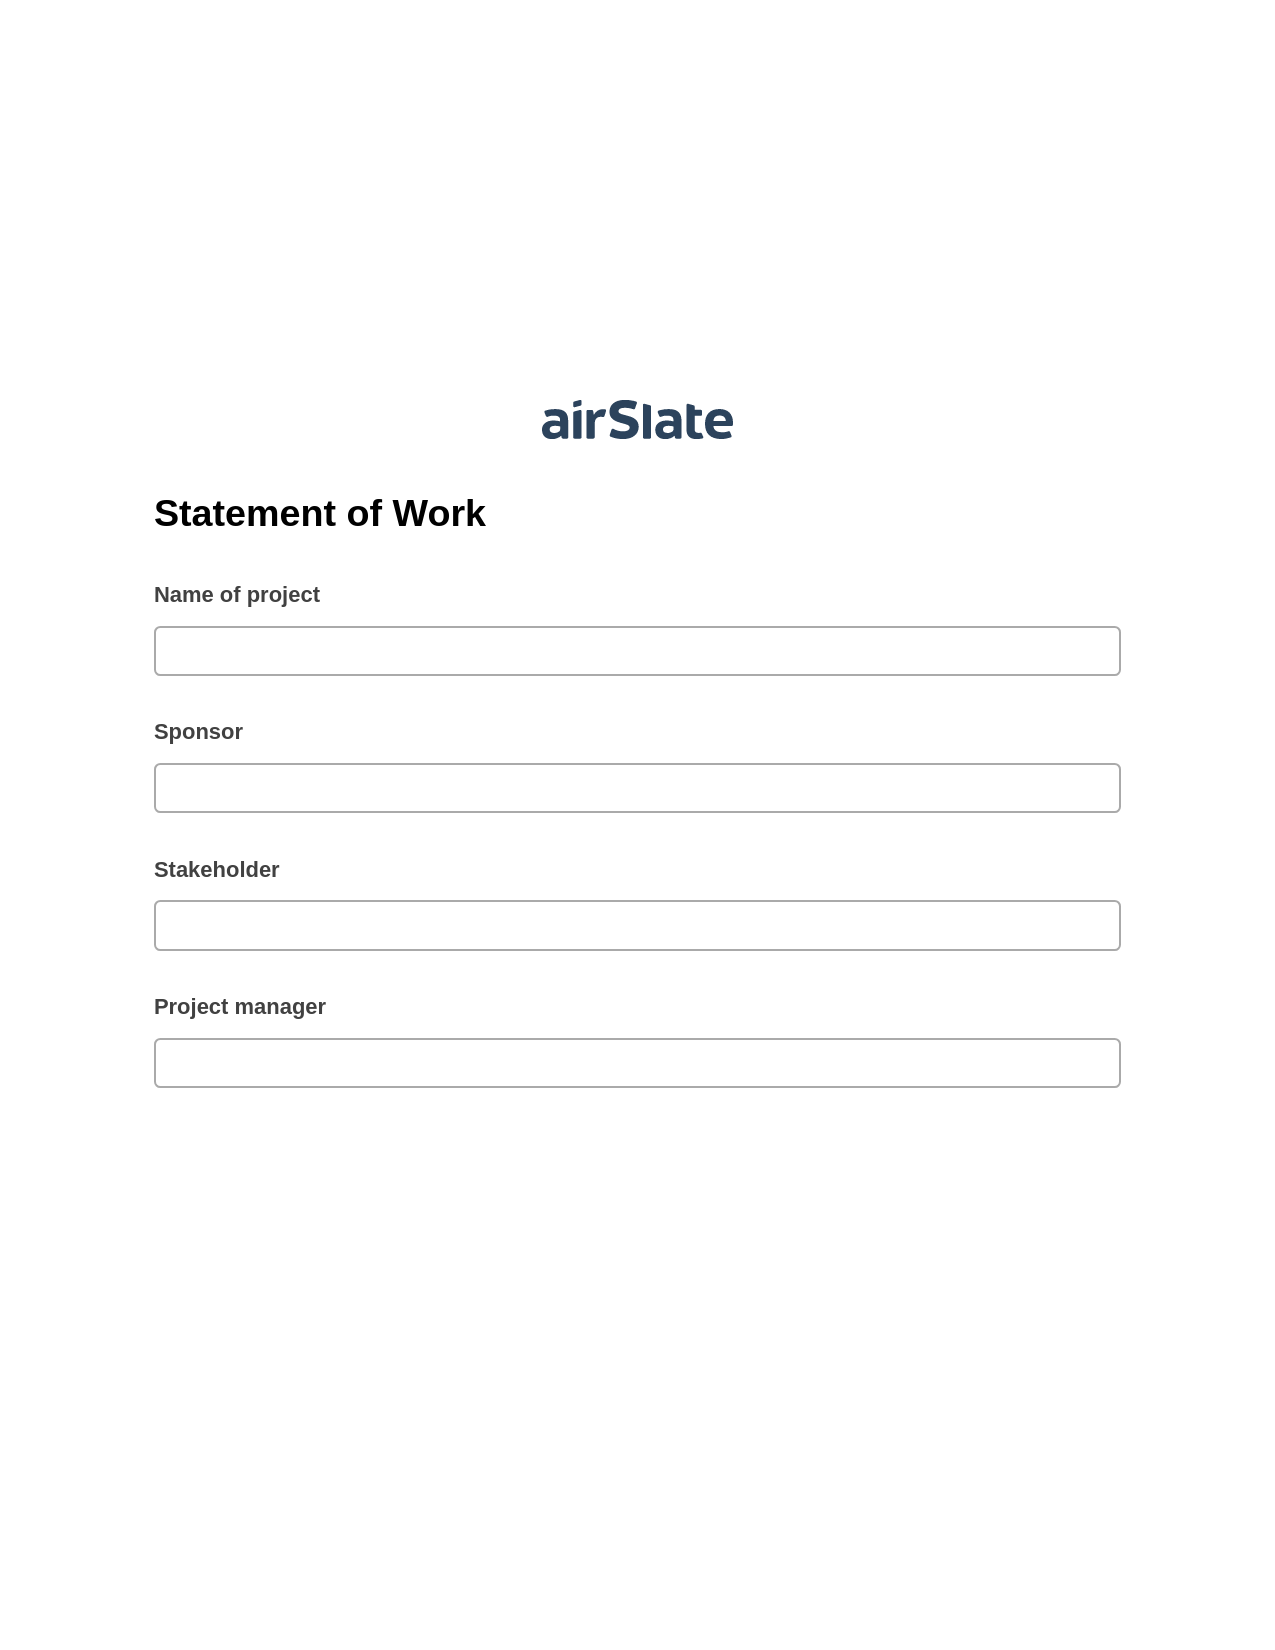 Statement of Work Pre-fill Dropdown from Airtable, Remove Tags From Slate Bot, Slack Two-Way Binding Bot